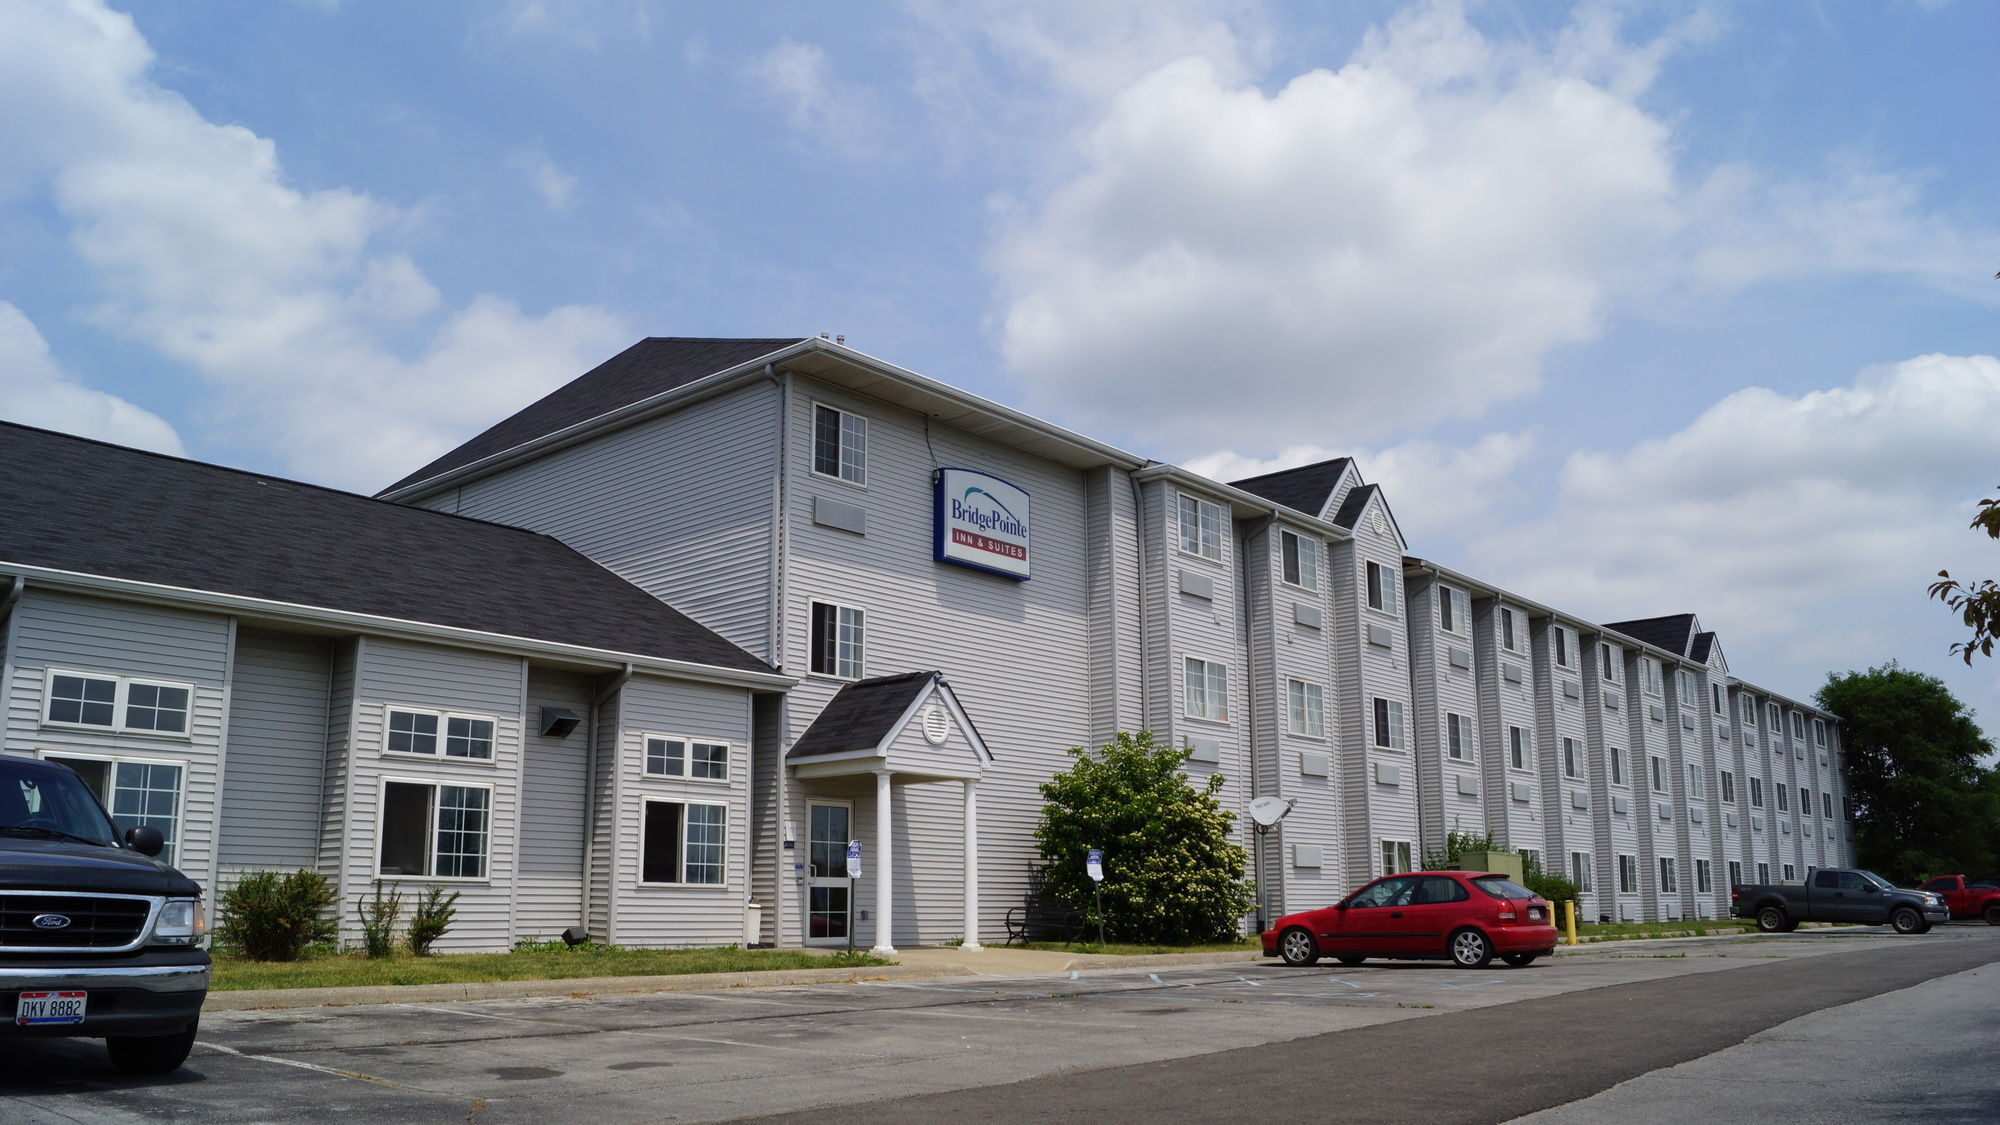 Toledo BridgePointe Inn & Suites by Hollywood Casino, Downtown, Owens College